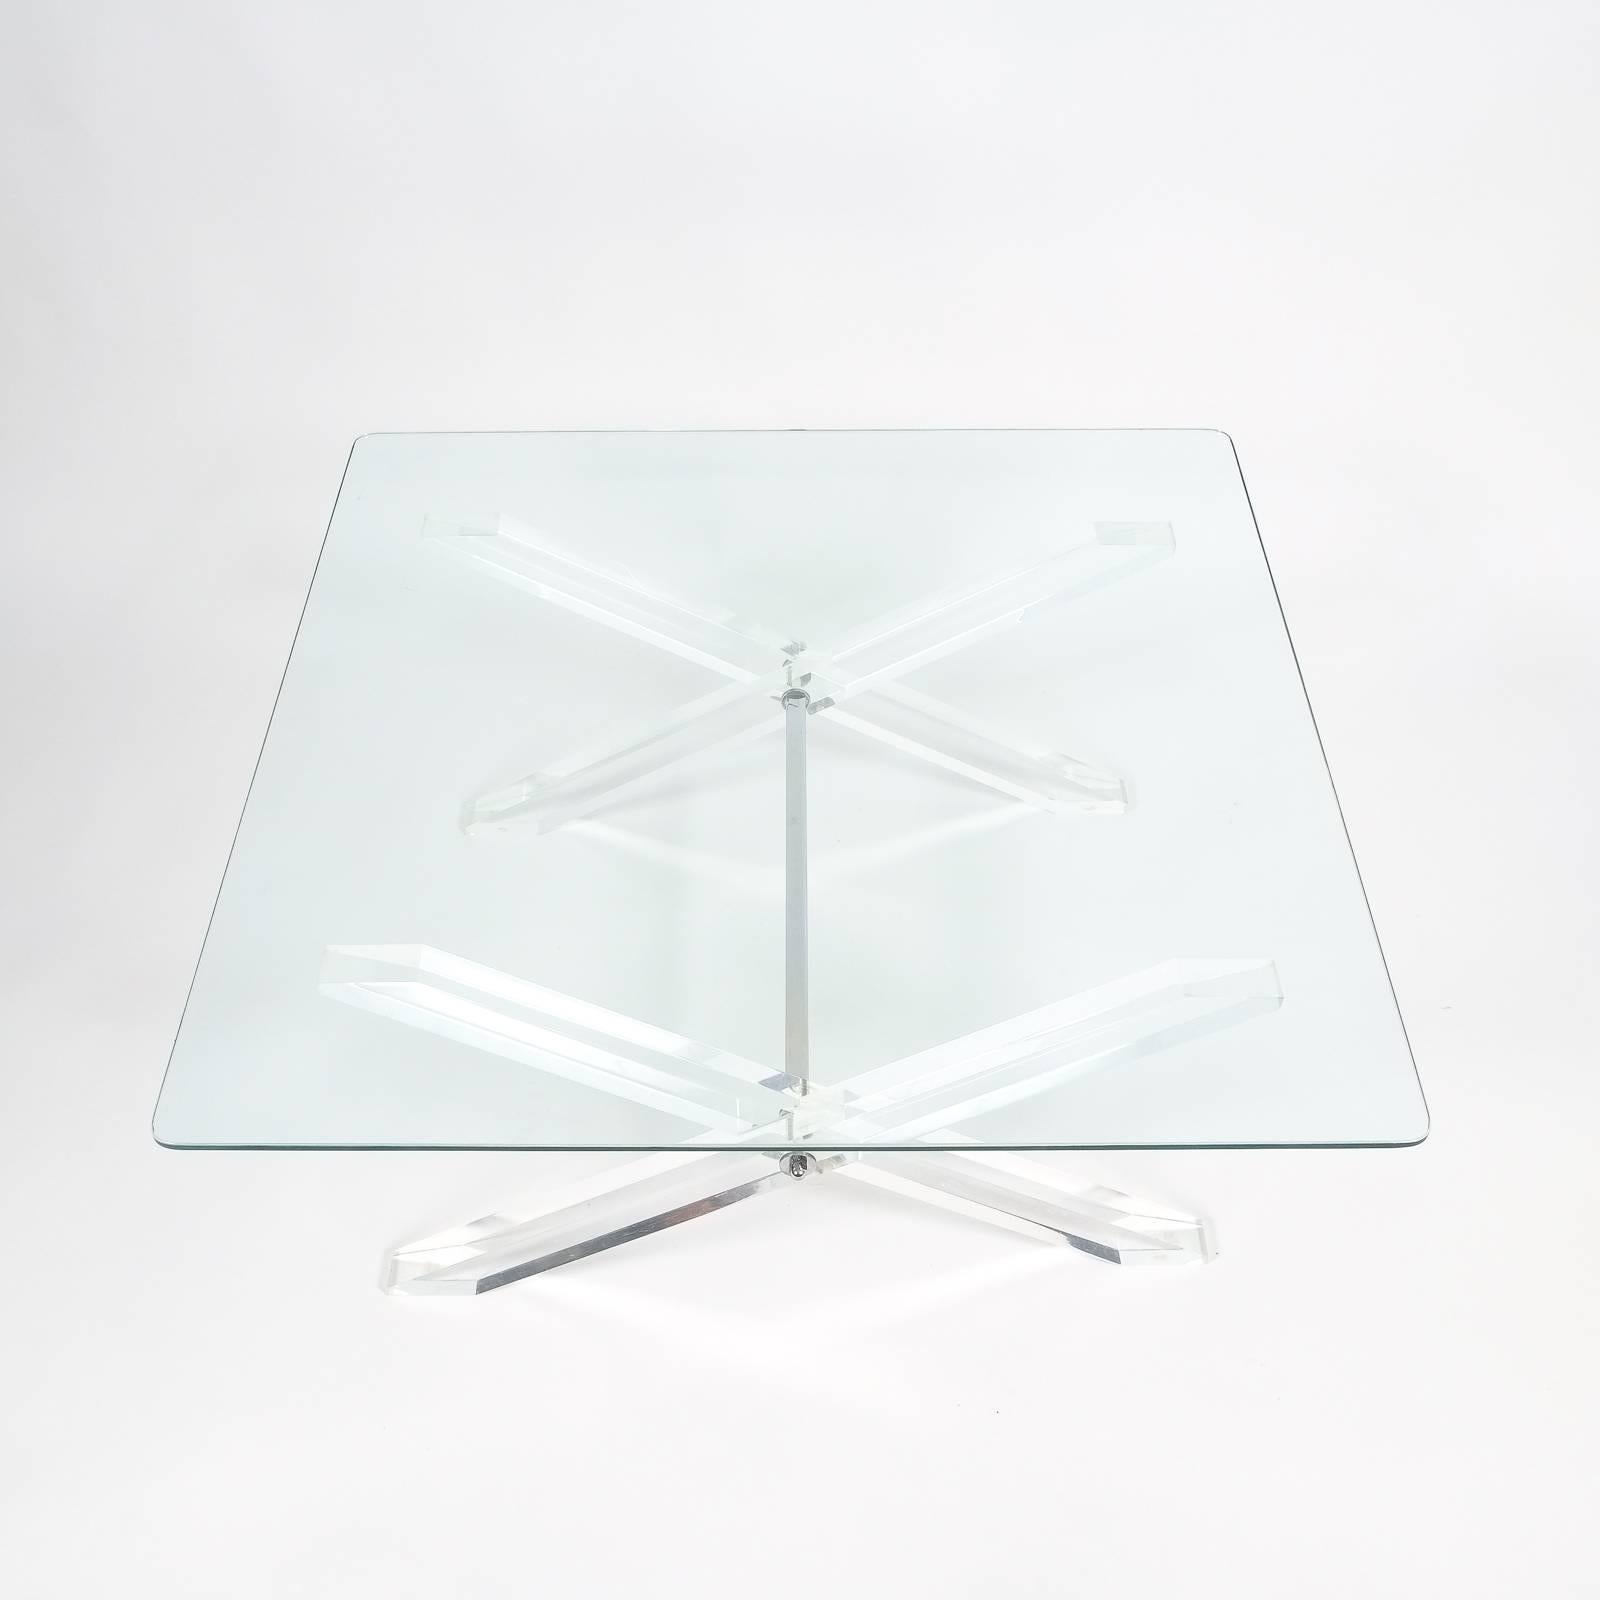 Nice Lucite X-frame table from the 1970s with a 35